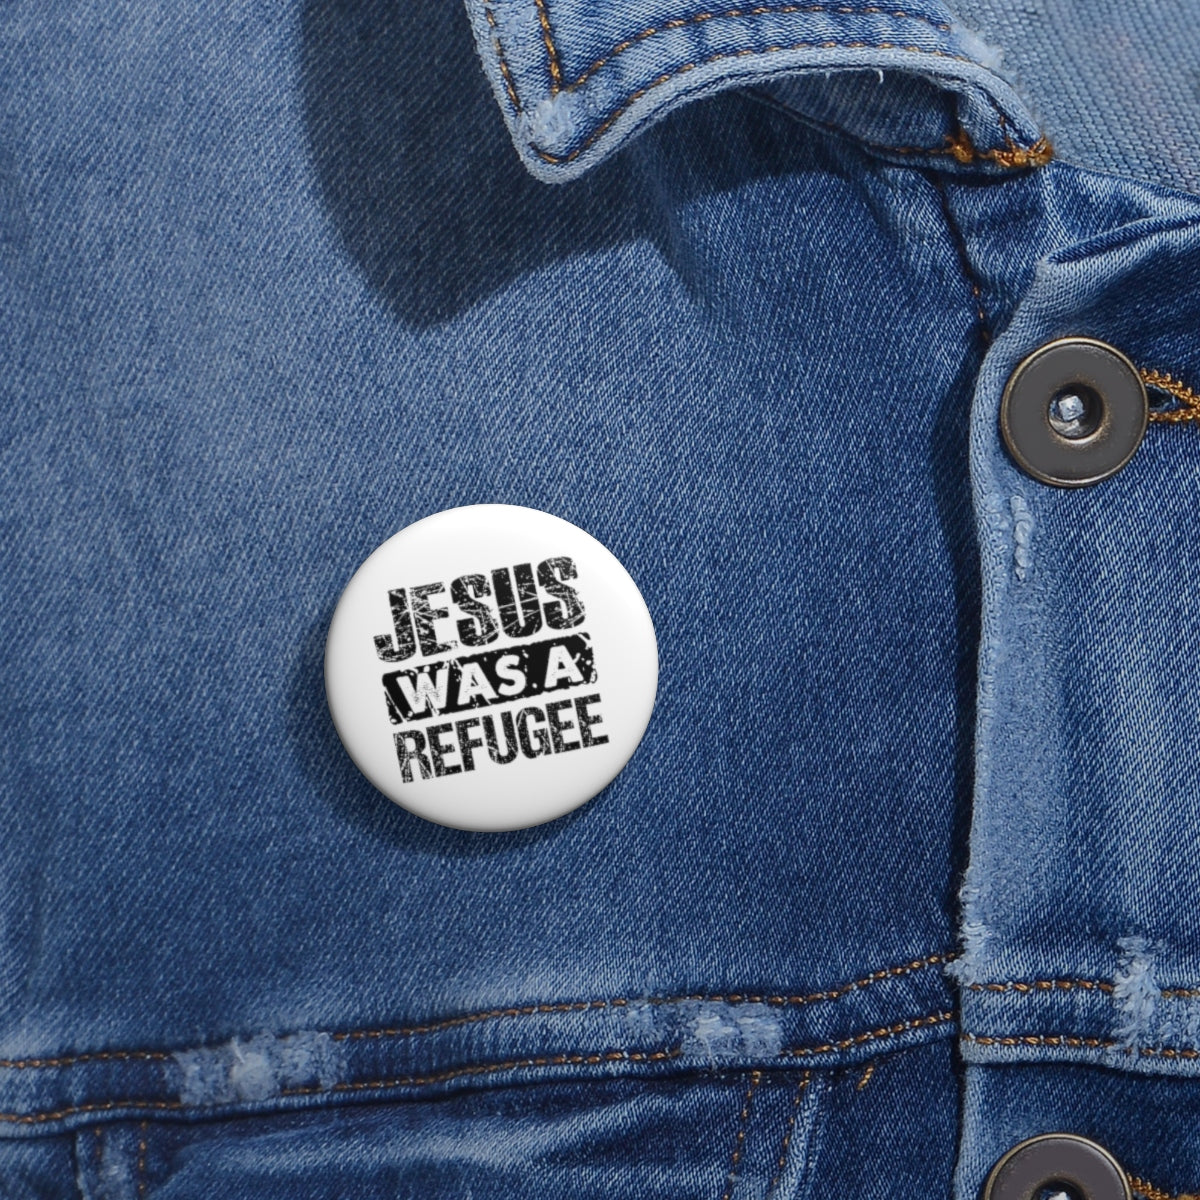 Jesus was a Refugee Pin Buttons